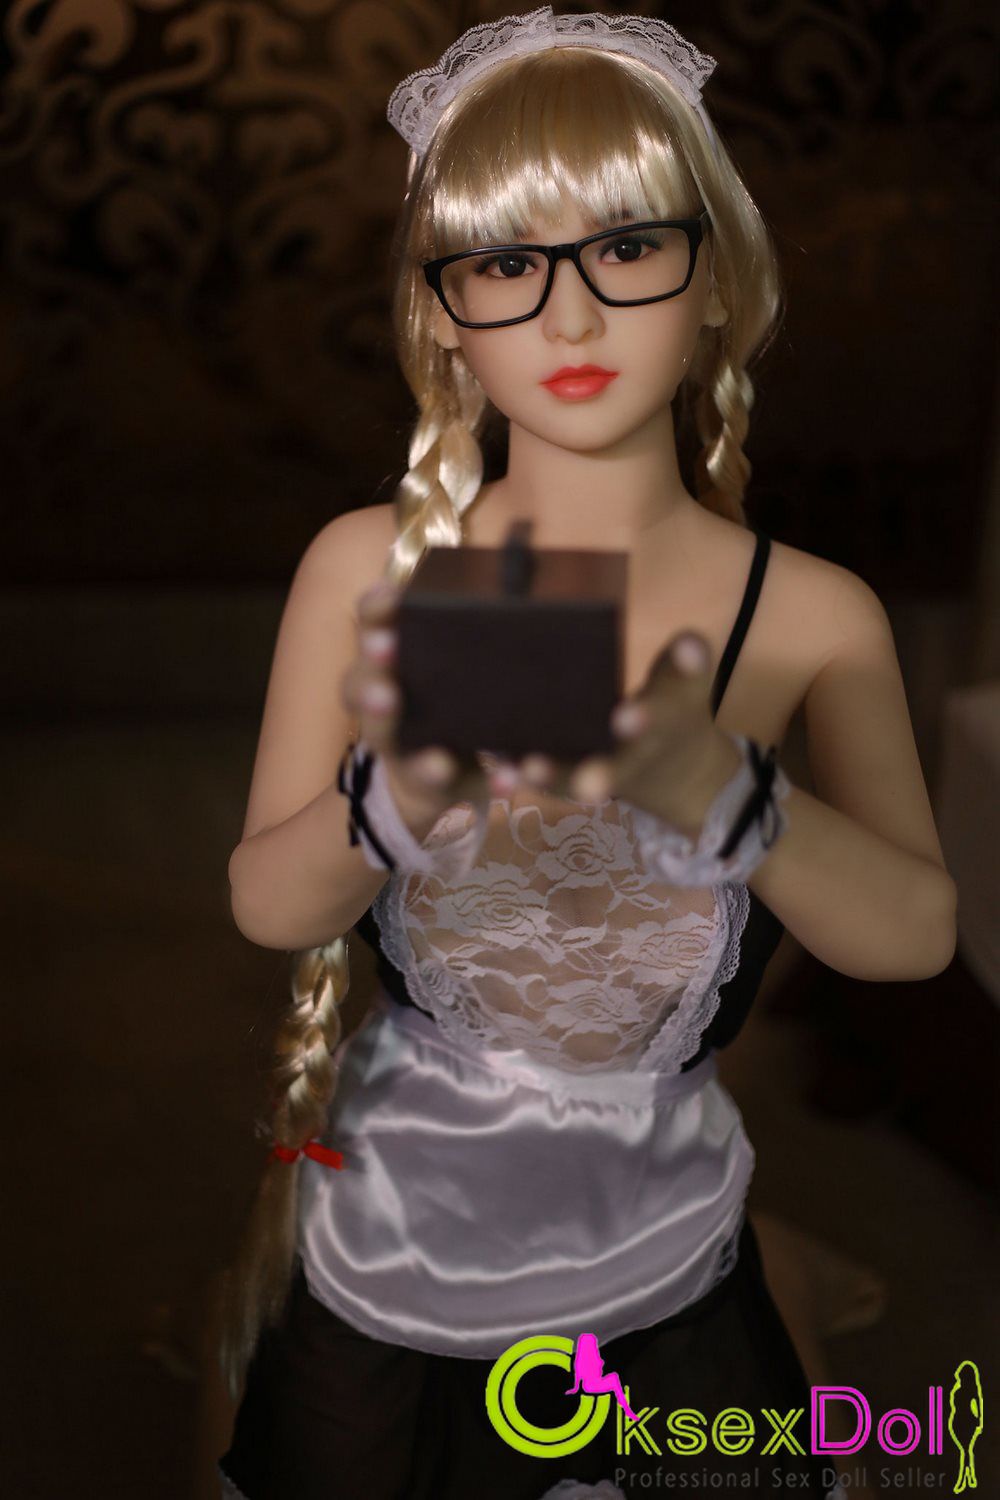 Blonde Maid Sex Doll images